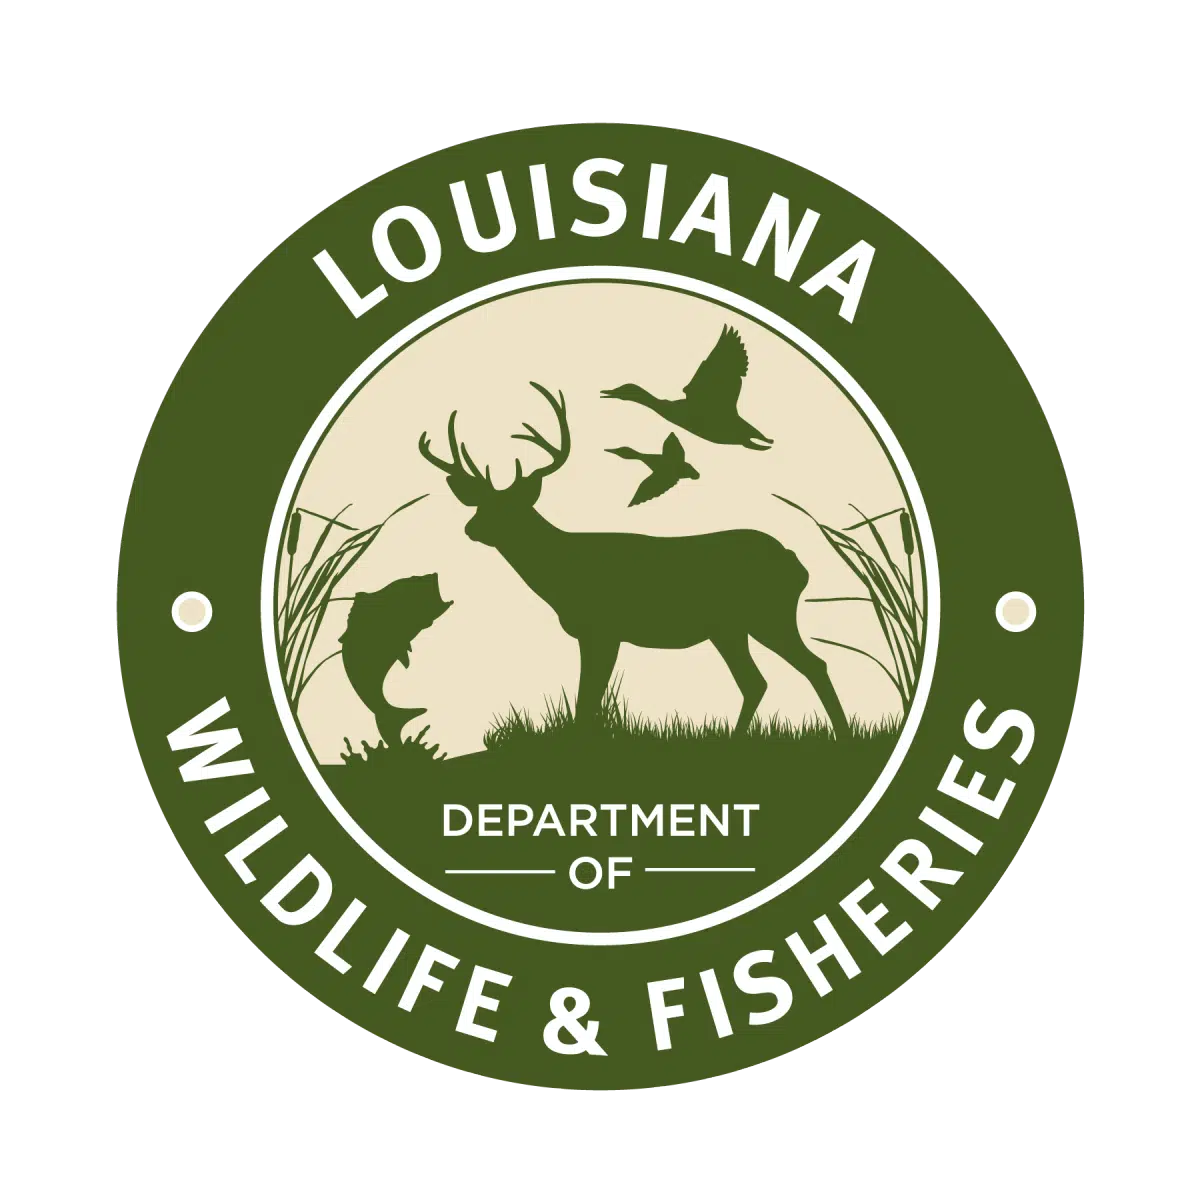 Louisiana Department of Wildlife and Fisheries alerts public of potential fish kills due to hot temperatures and summer storms